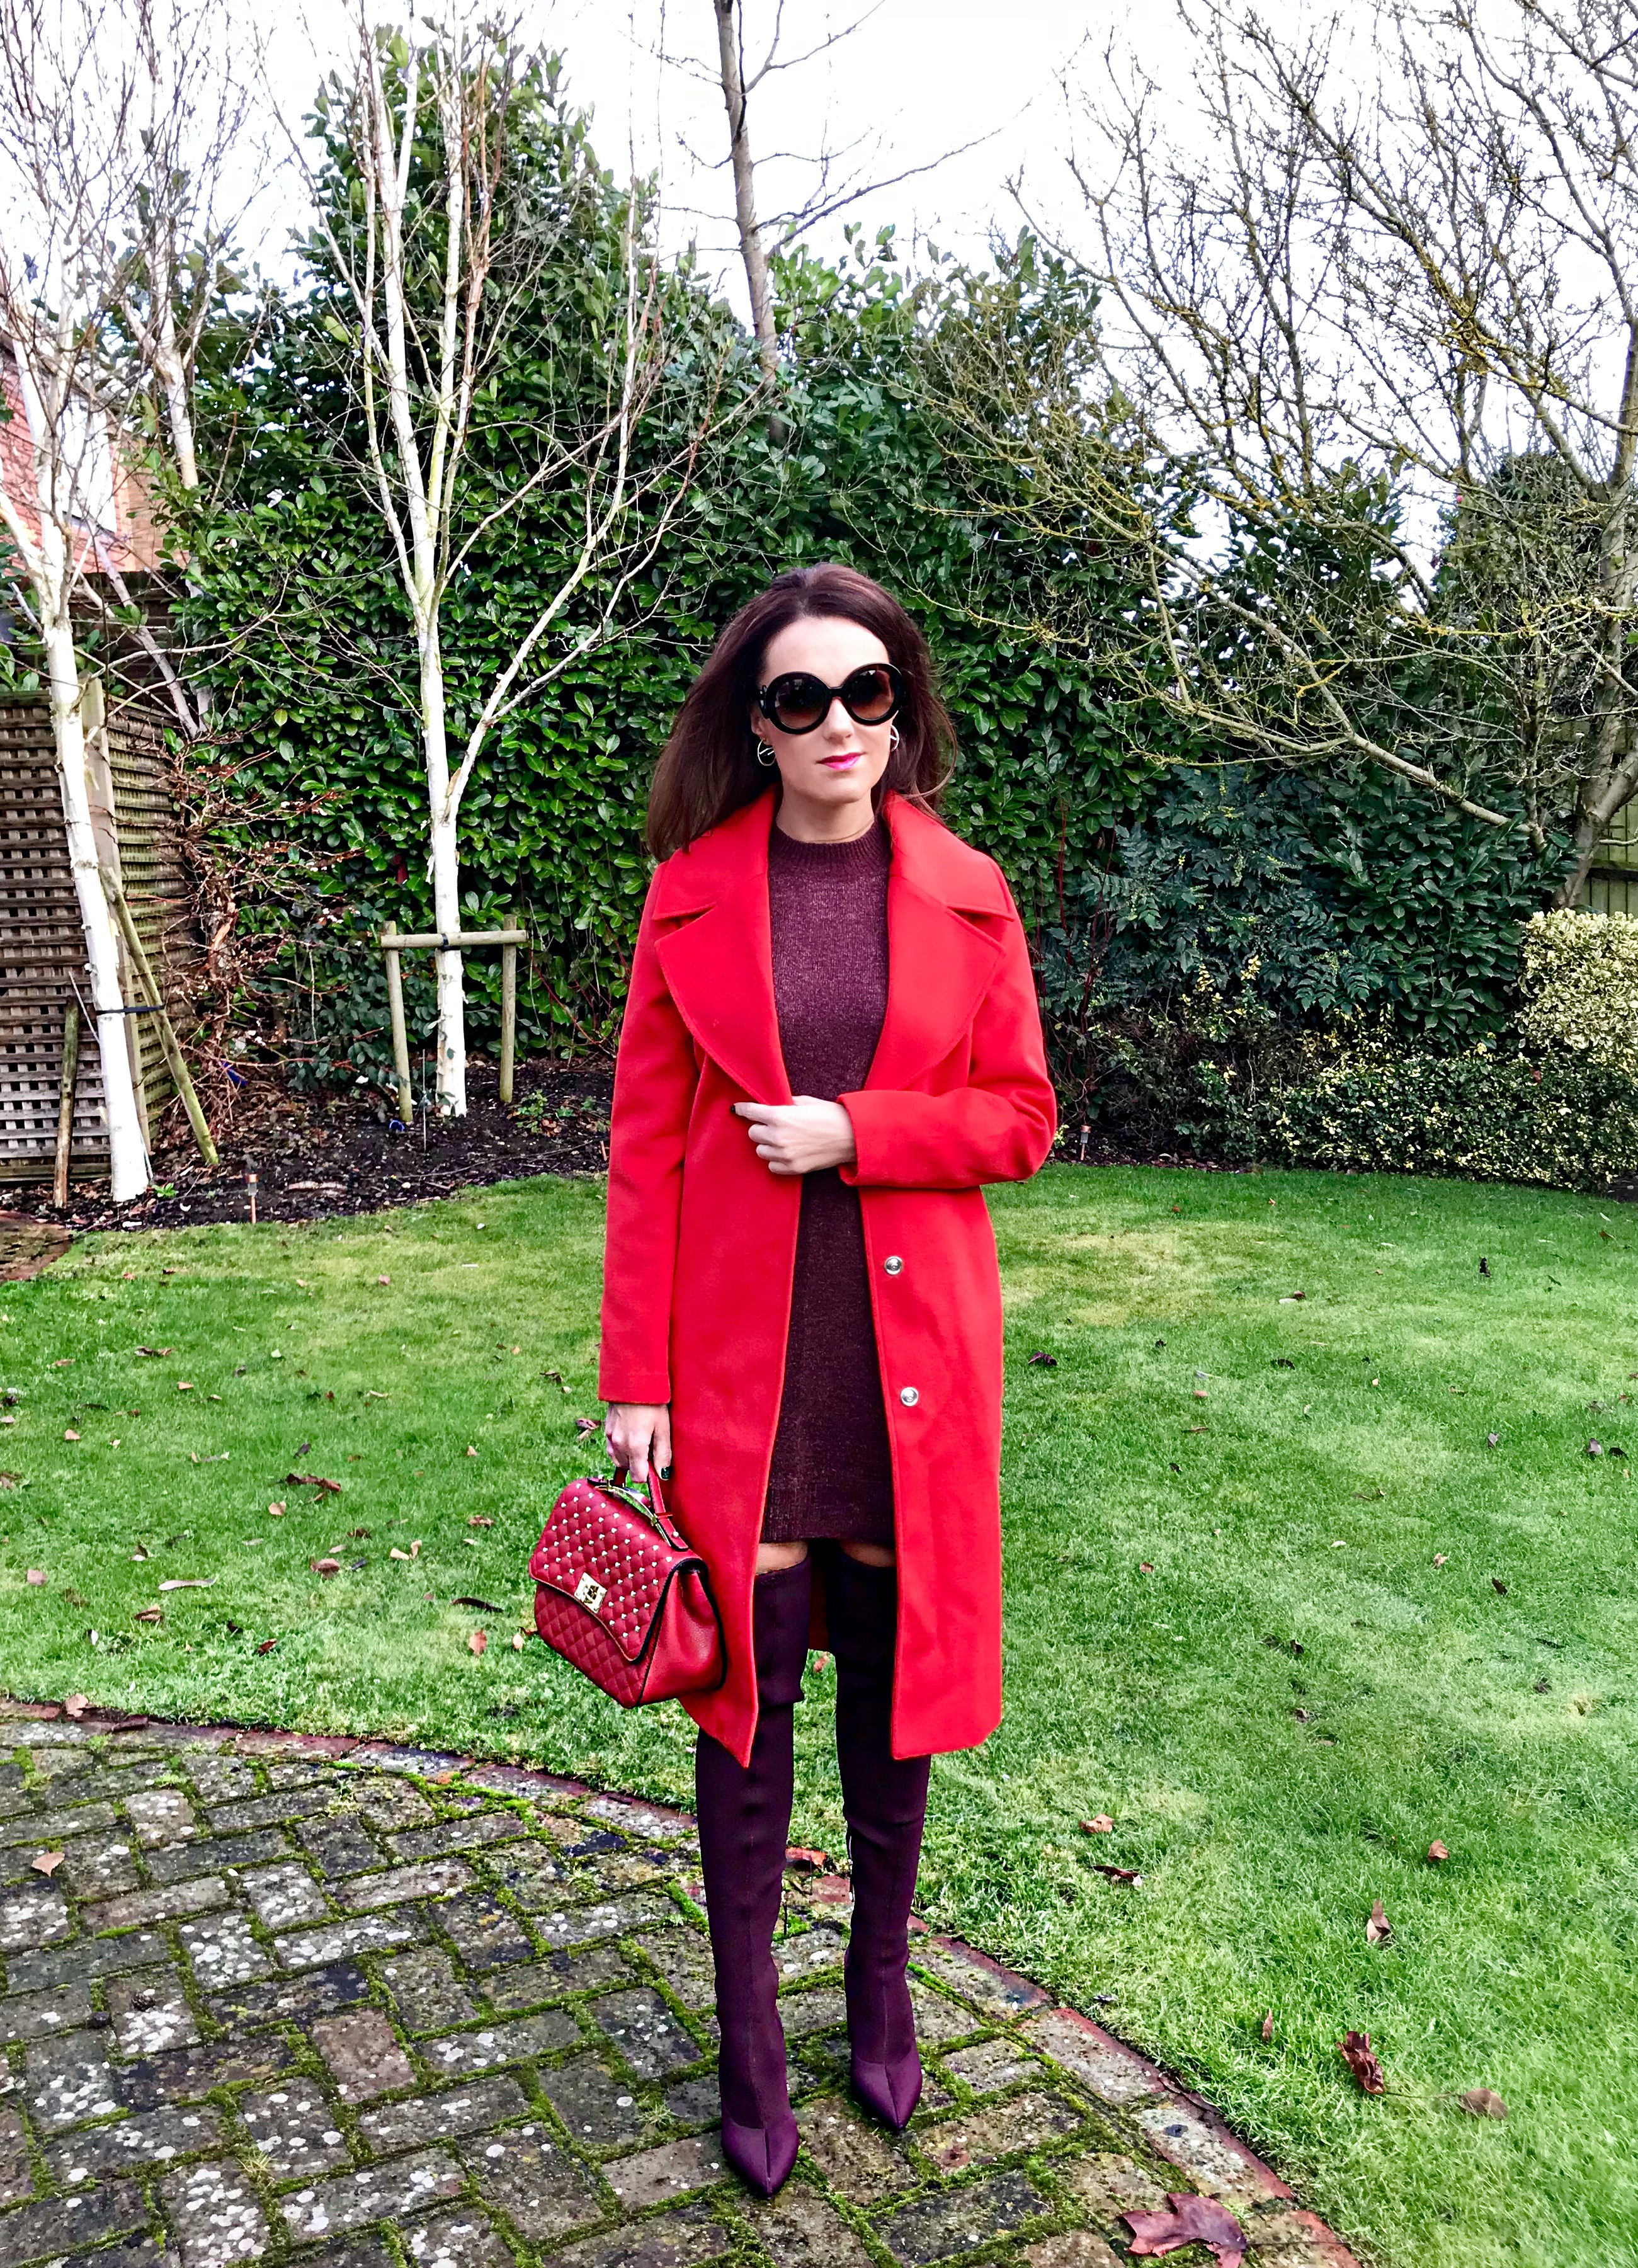 Miss Selfridge Smart Midi Coat | V by Very Quilt and Stud Satchel | River Island River Island Knitted Over The Knee Boots- Dark Red | Abercrombie & Fitch Burgundy Long Sleeve Knit Dress Shades of Valentine | Red long coat & Burgundy boots | Swarovski earrings | Baroque Prada sunglasses